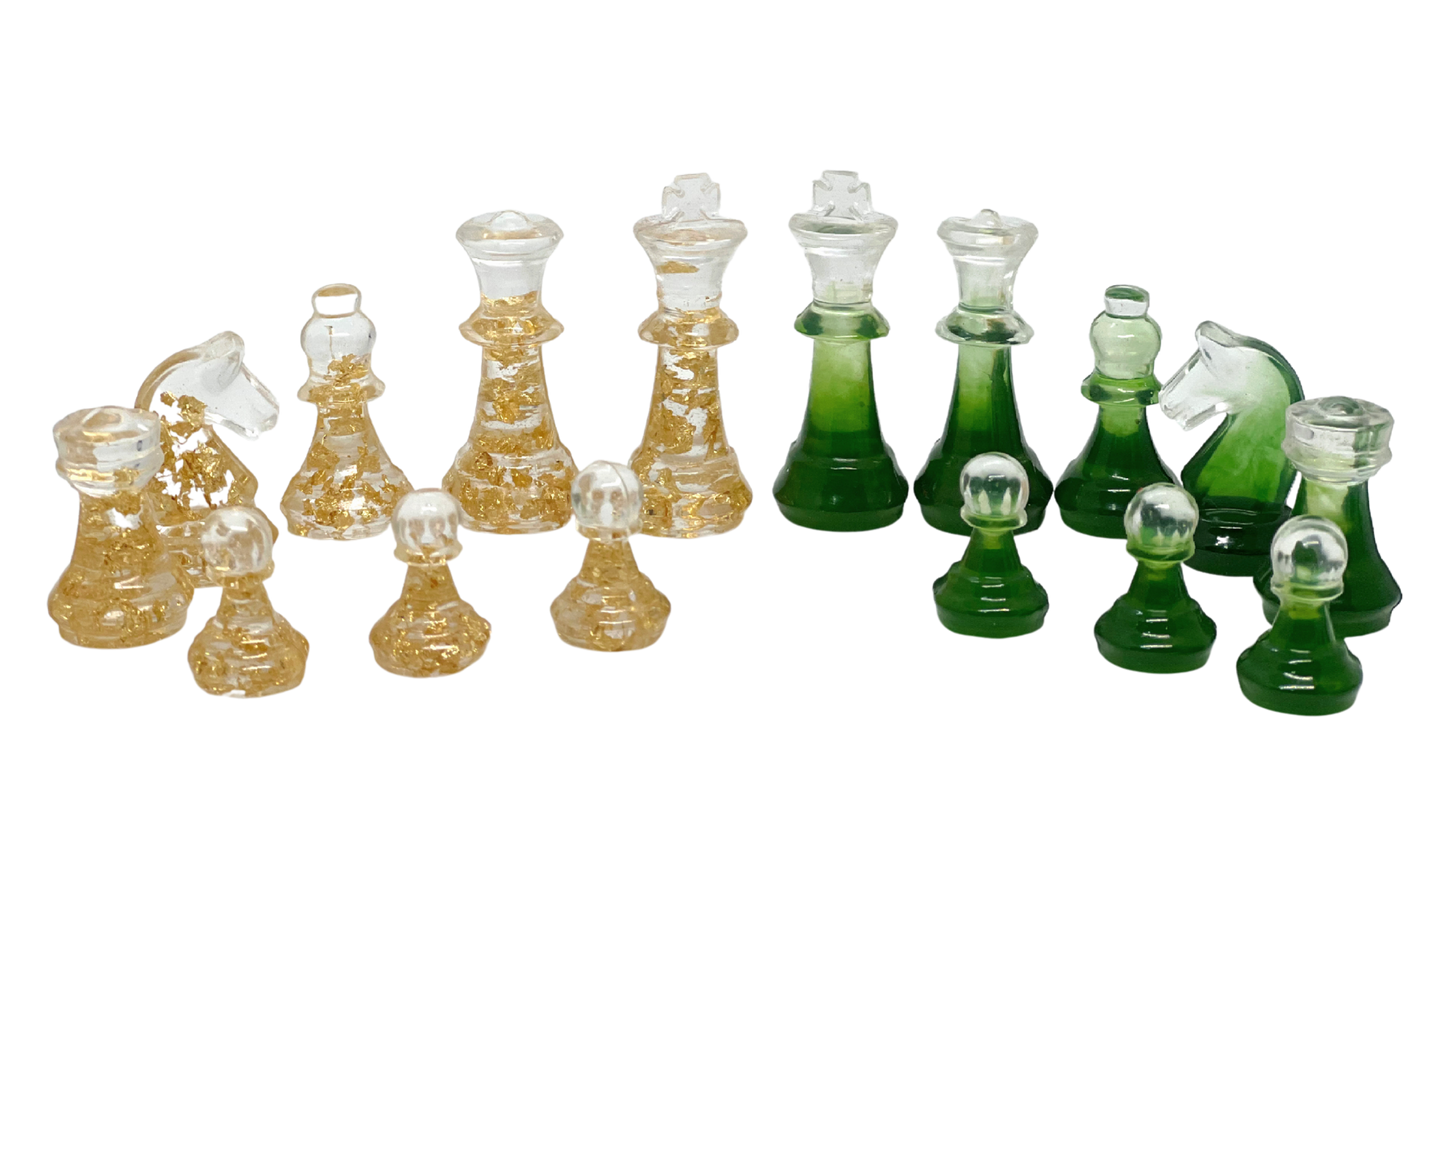 Large Liveliness Resin Handmade Chess Board - Nature's Art Lab